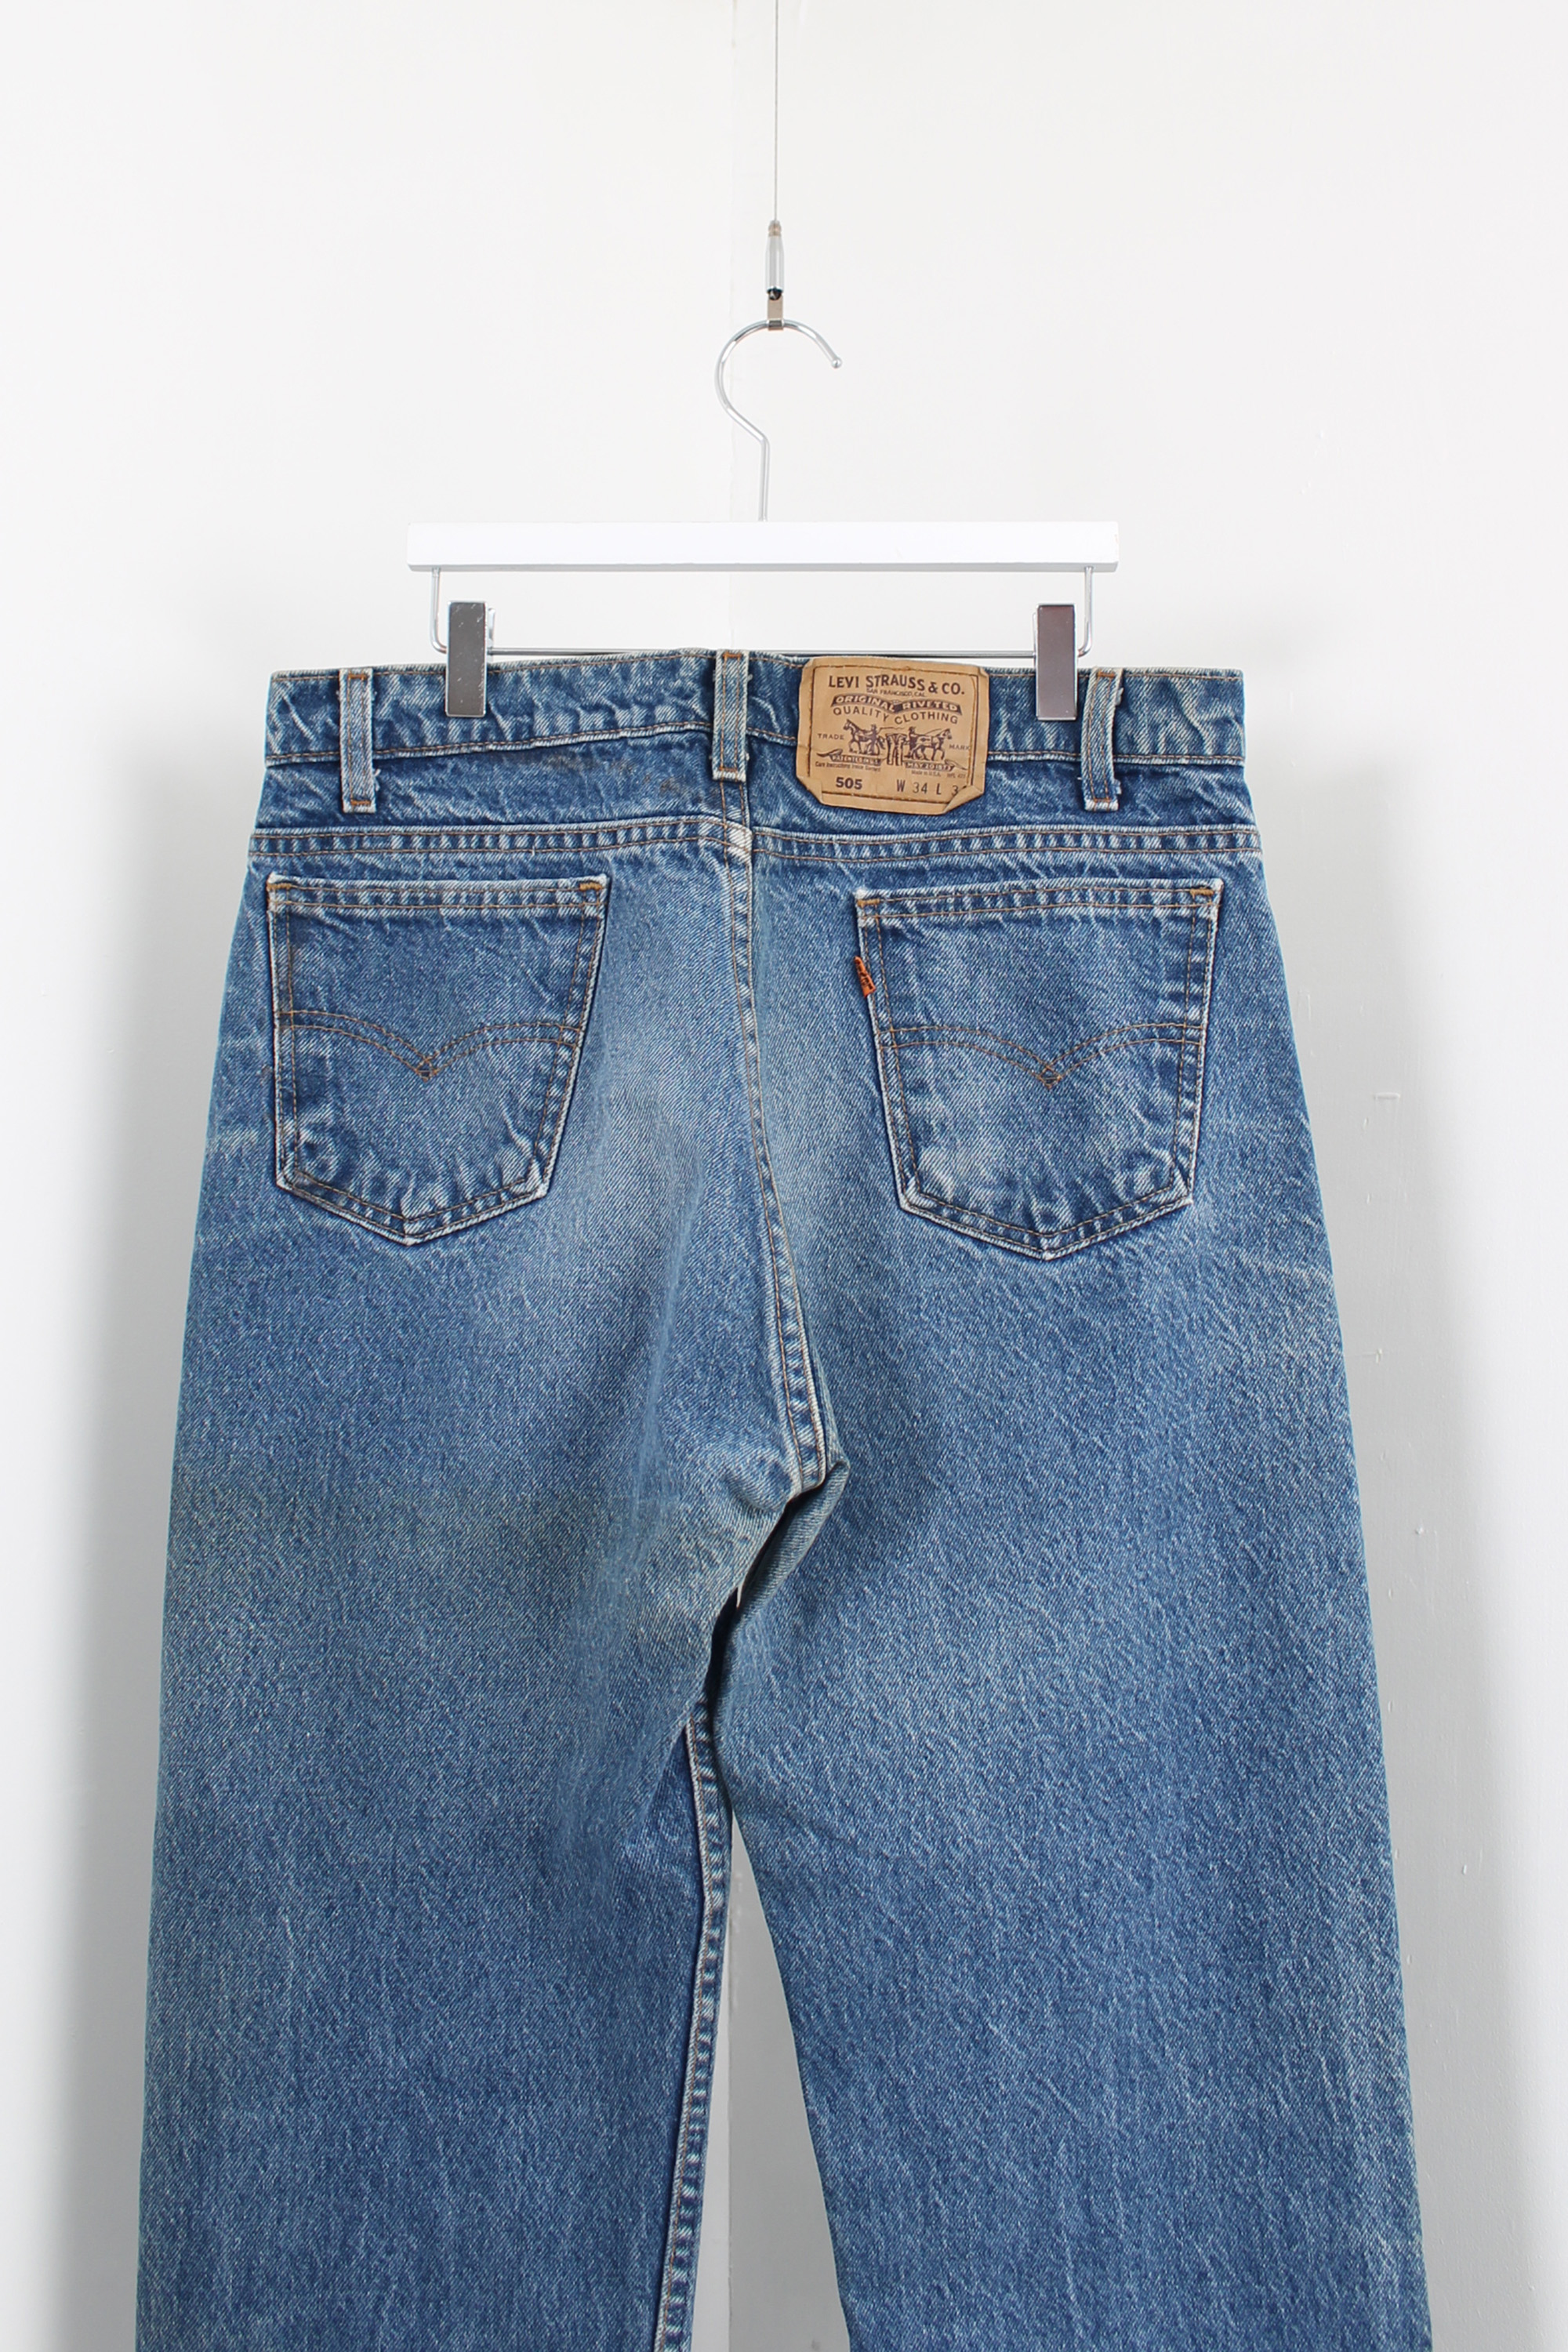 Levi&#039;s 505 jean(made in usa)